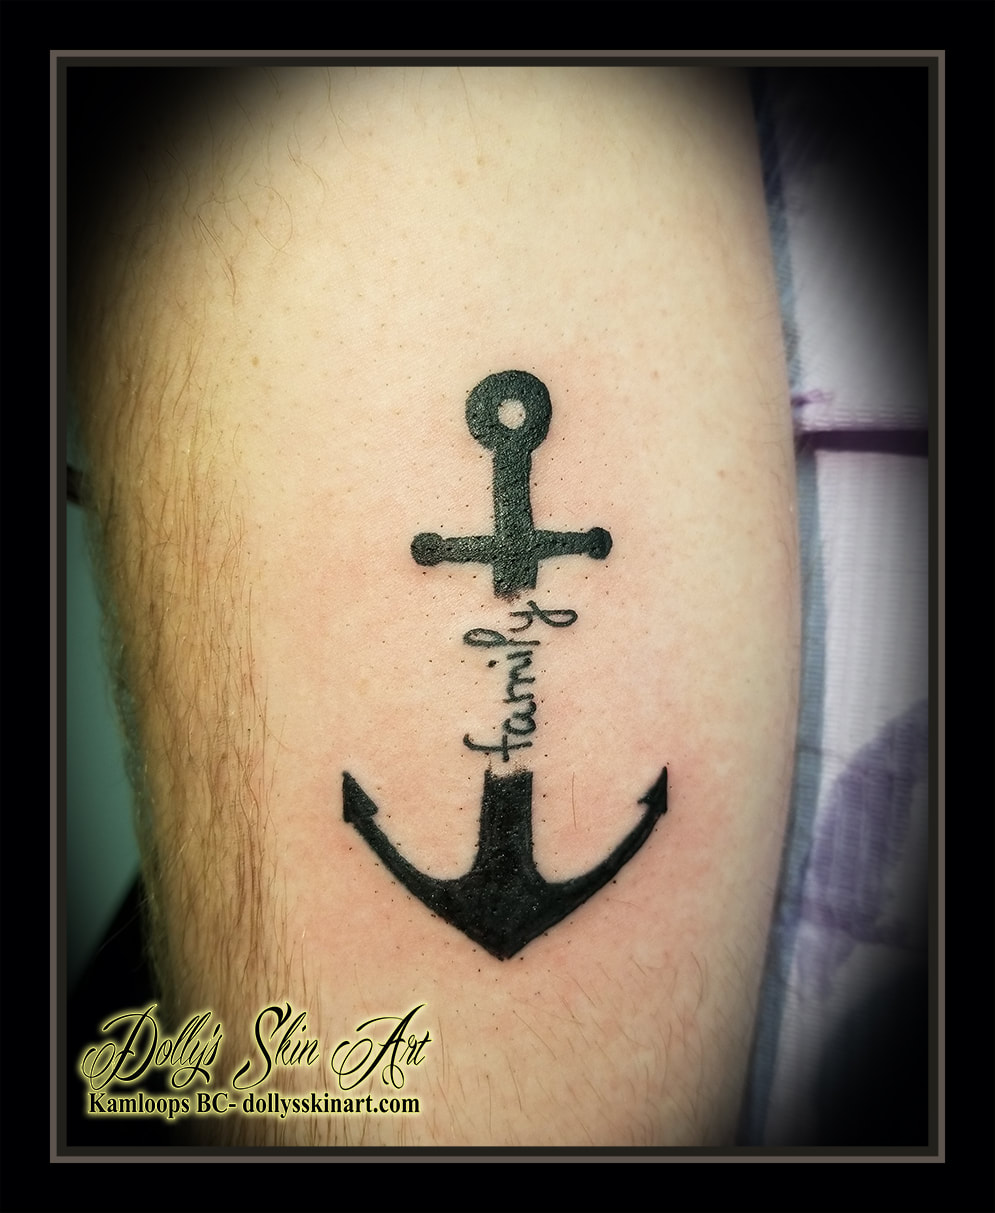 anchor family tattoo black silhouette ship hand writing text font tattoo kamloops dolly's skin art